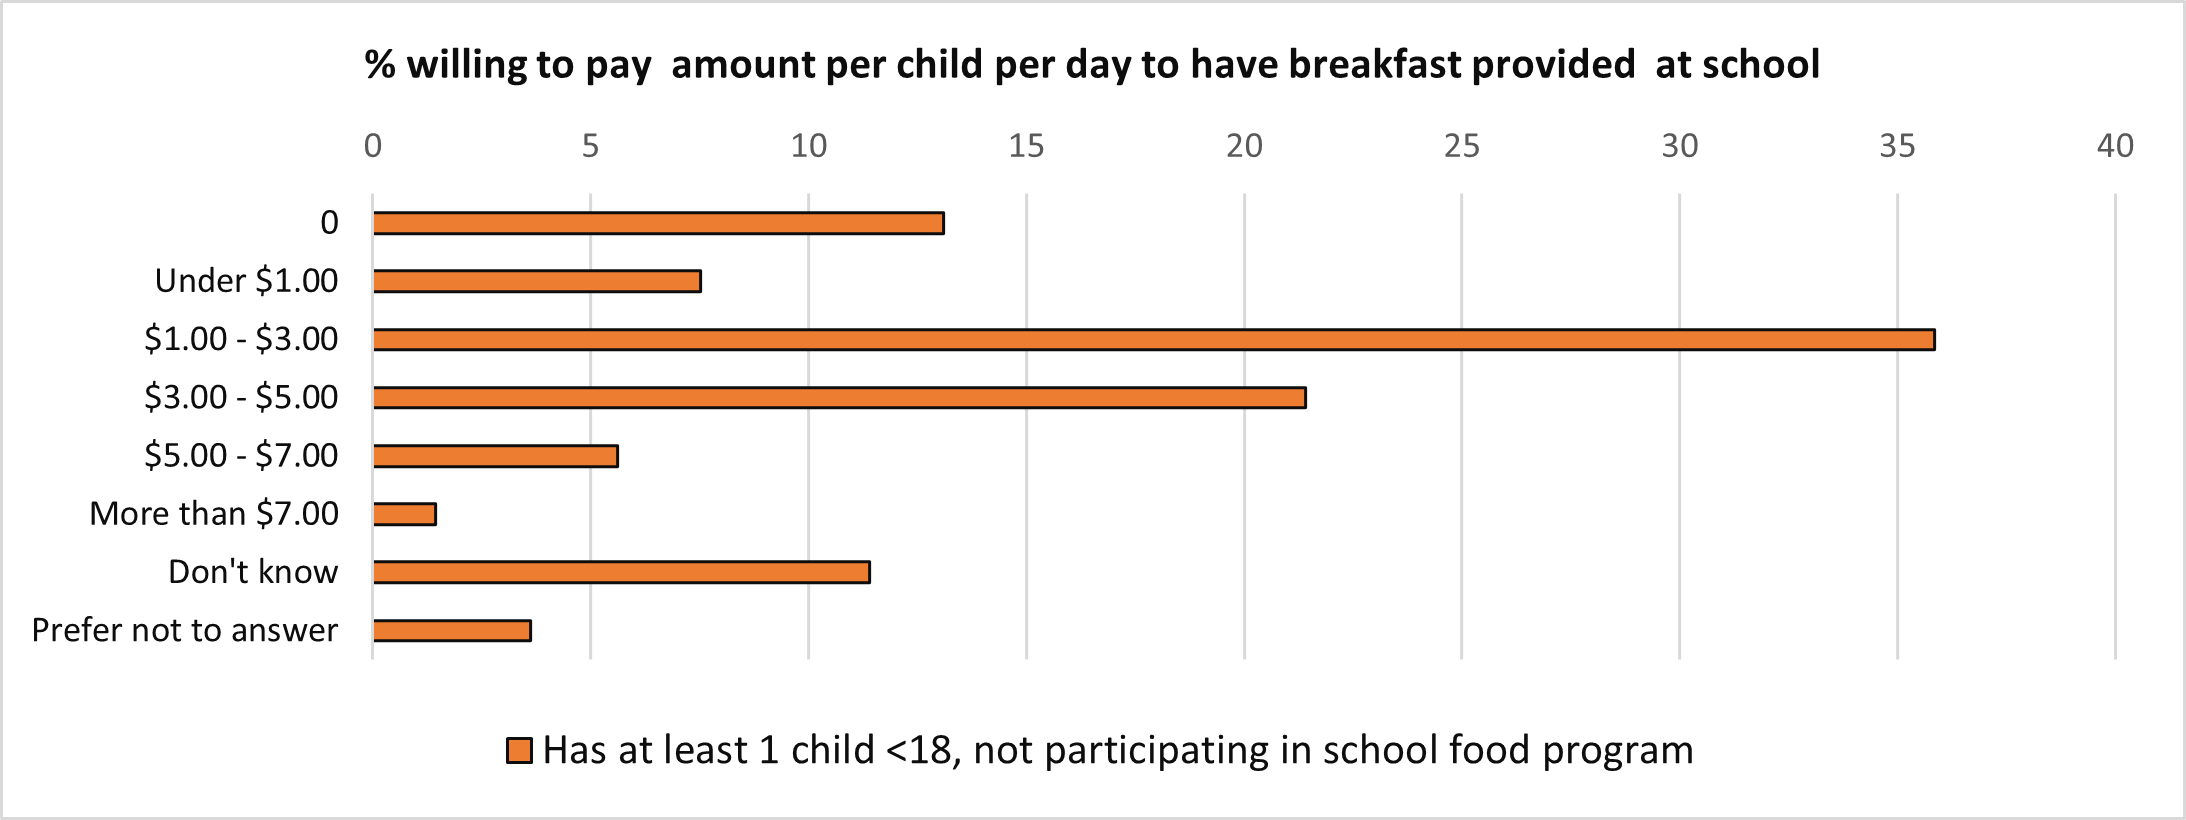 A bar chart of the percent willing to pay amount per child per day to have breakfast provided at school. Text version below.